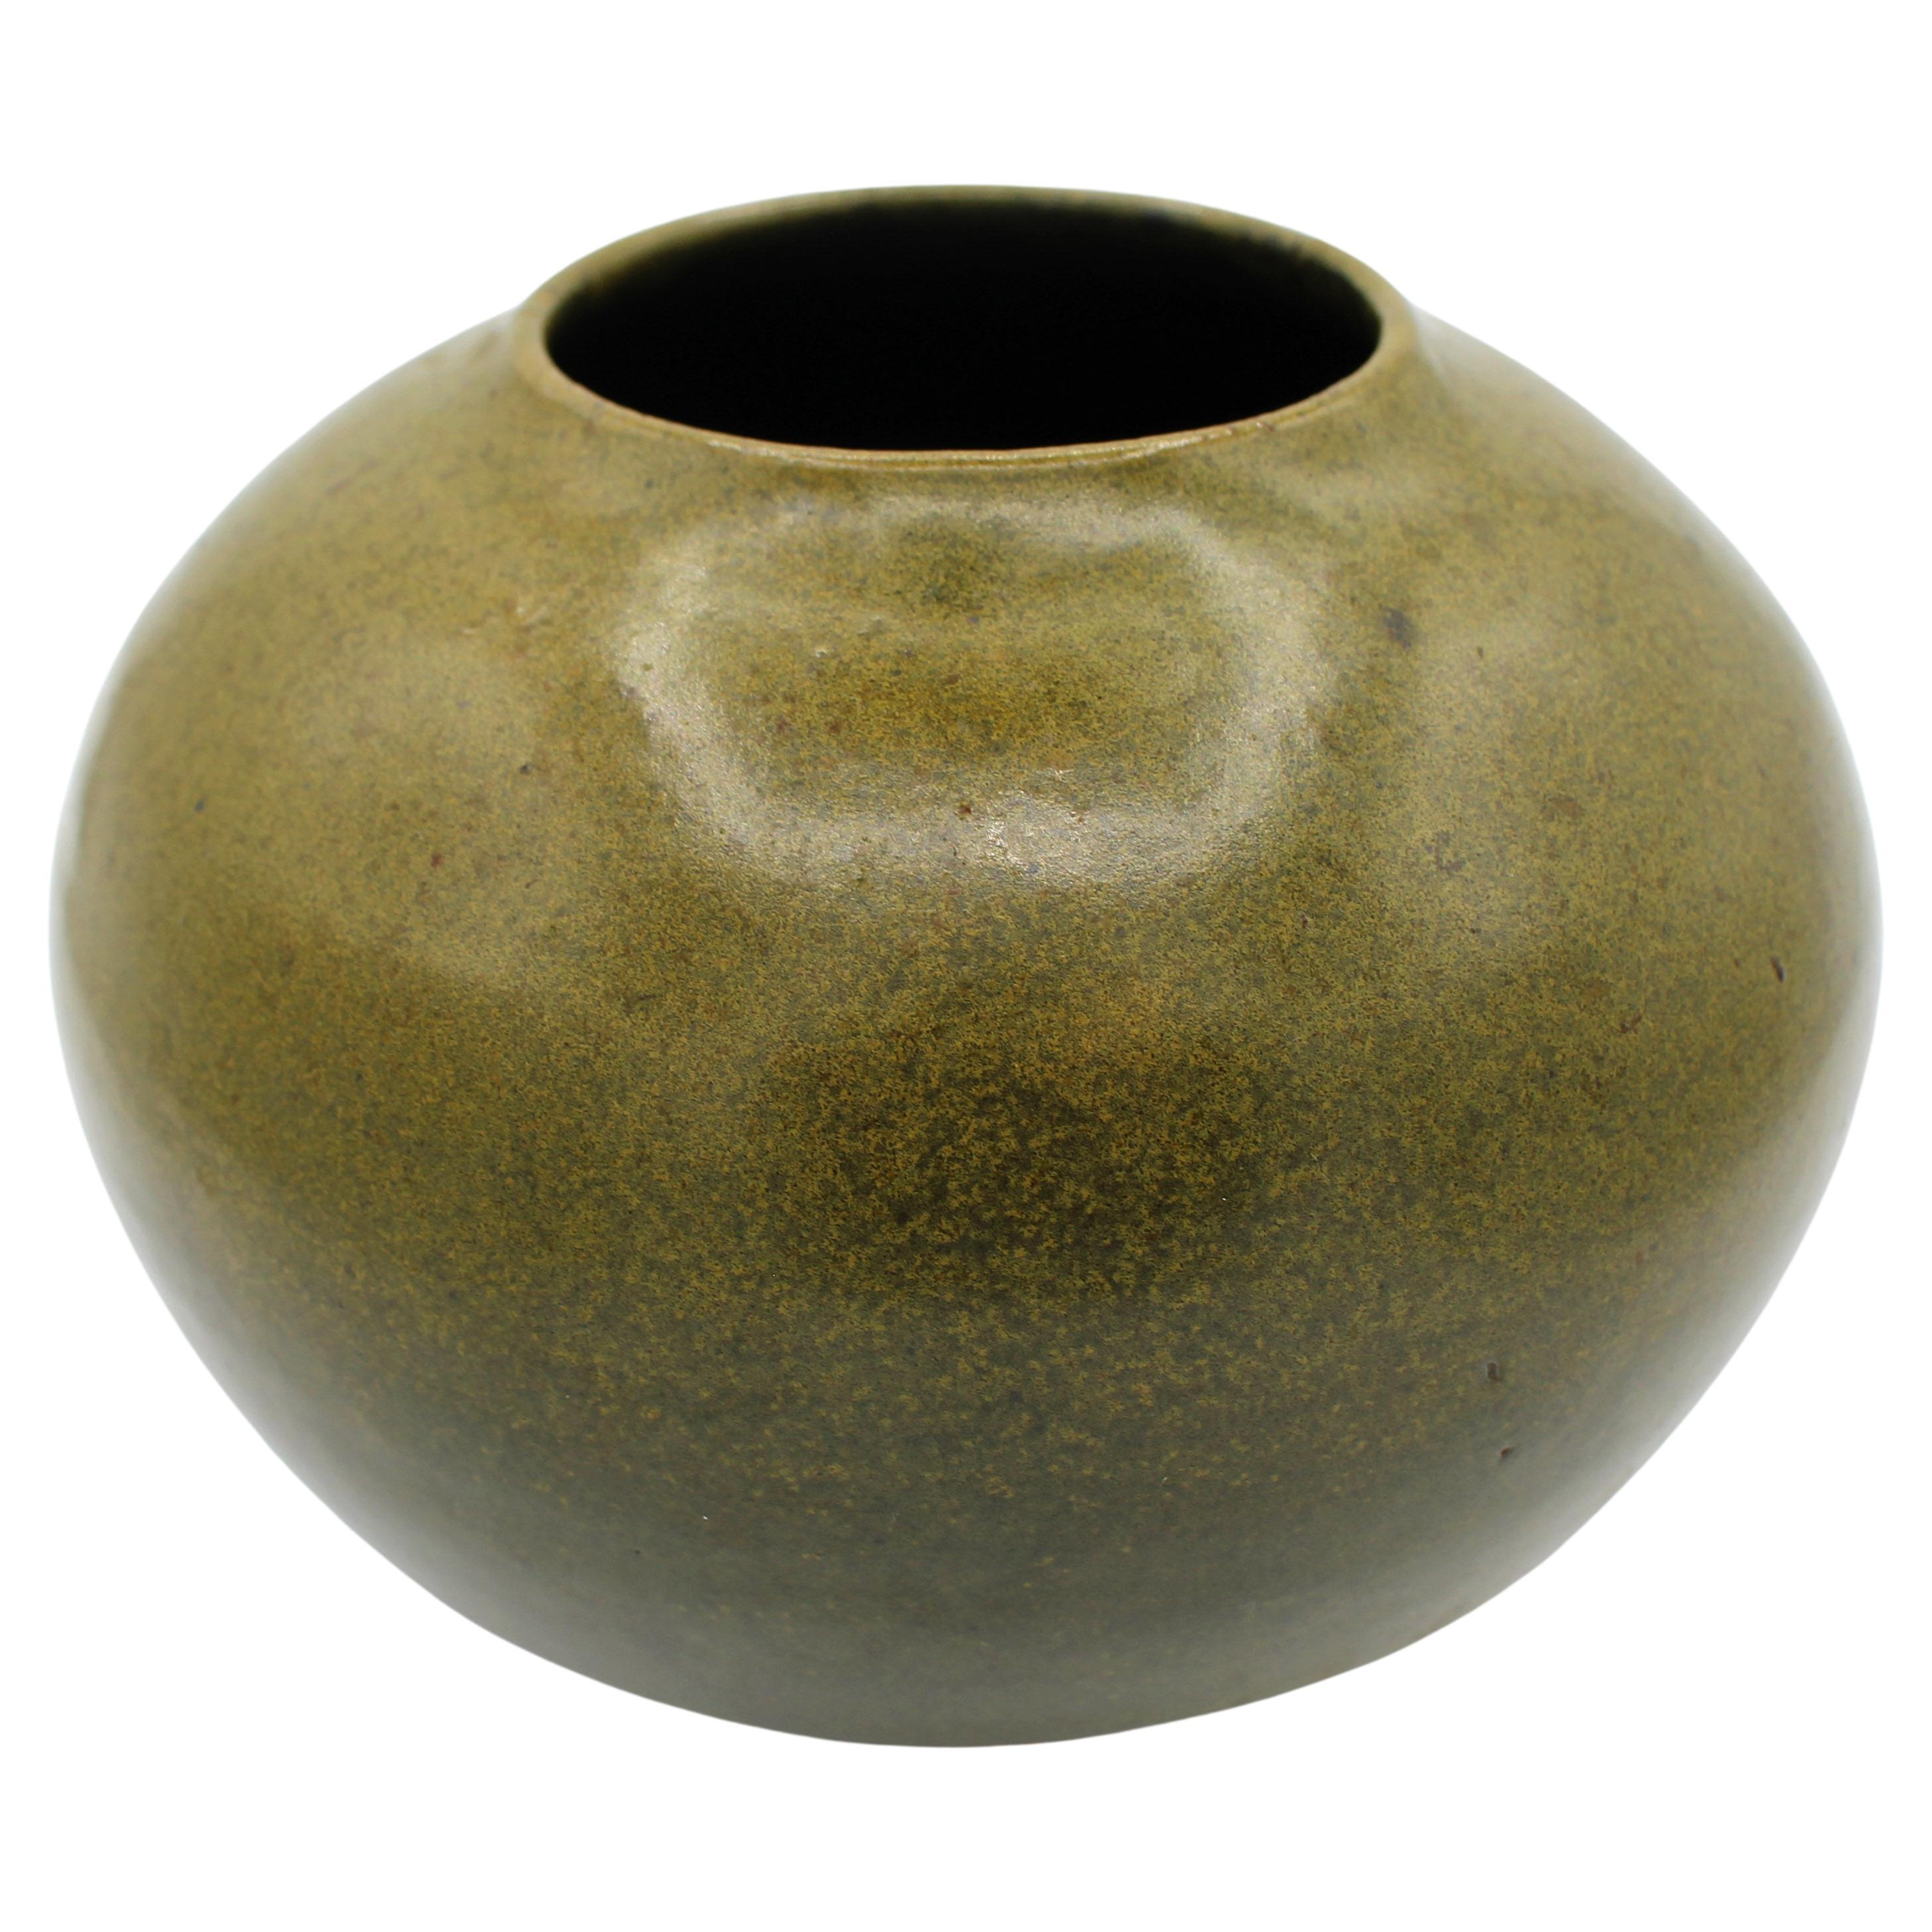 Mid-20th Century Jugtown Ware Pottery Vase For Sale